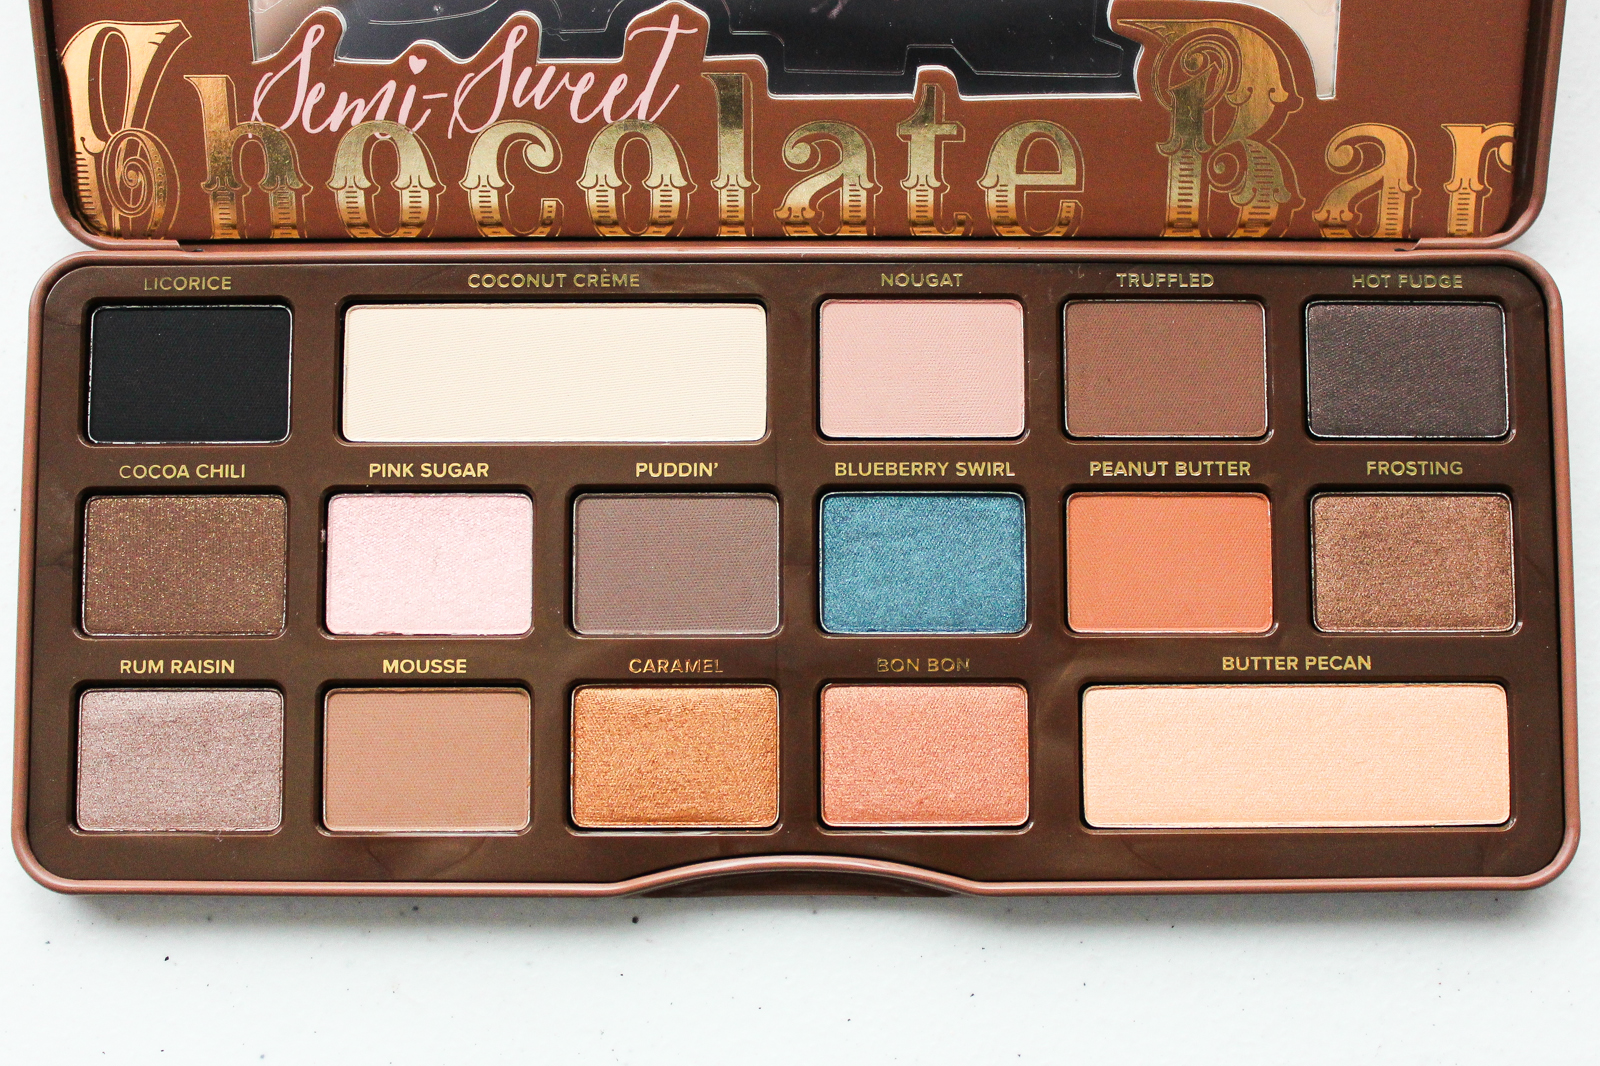 3.bp.blogspot.com/-2QVcfiVN-ac/VJJFCoBlqLI/AAAAAAAABfY/_0x5ypAkk7w/s1600/too-faced-semi-sweet-chocolate-bar-palette-review-swatches-6.png